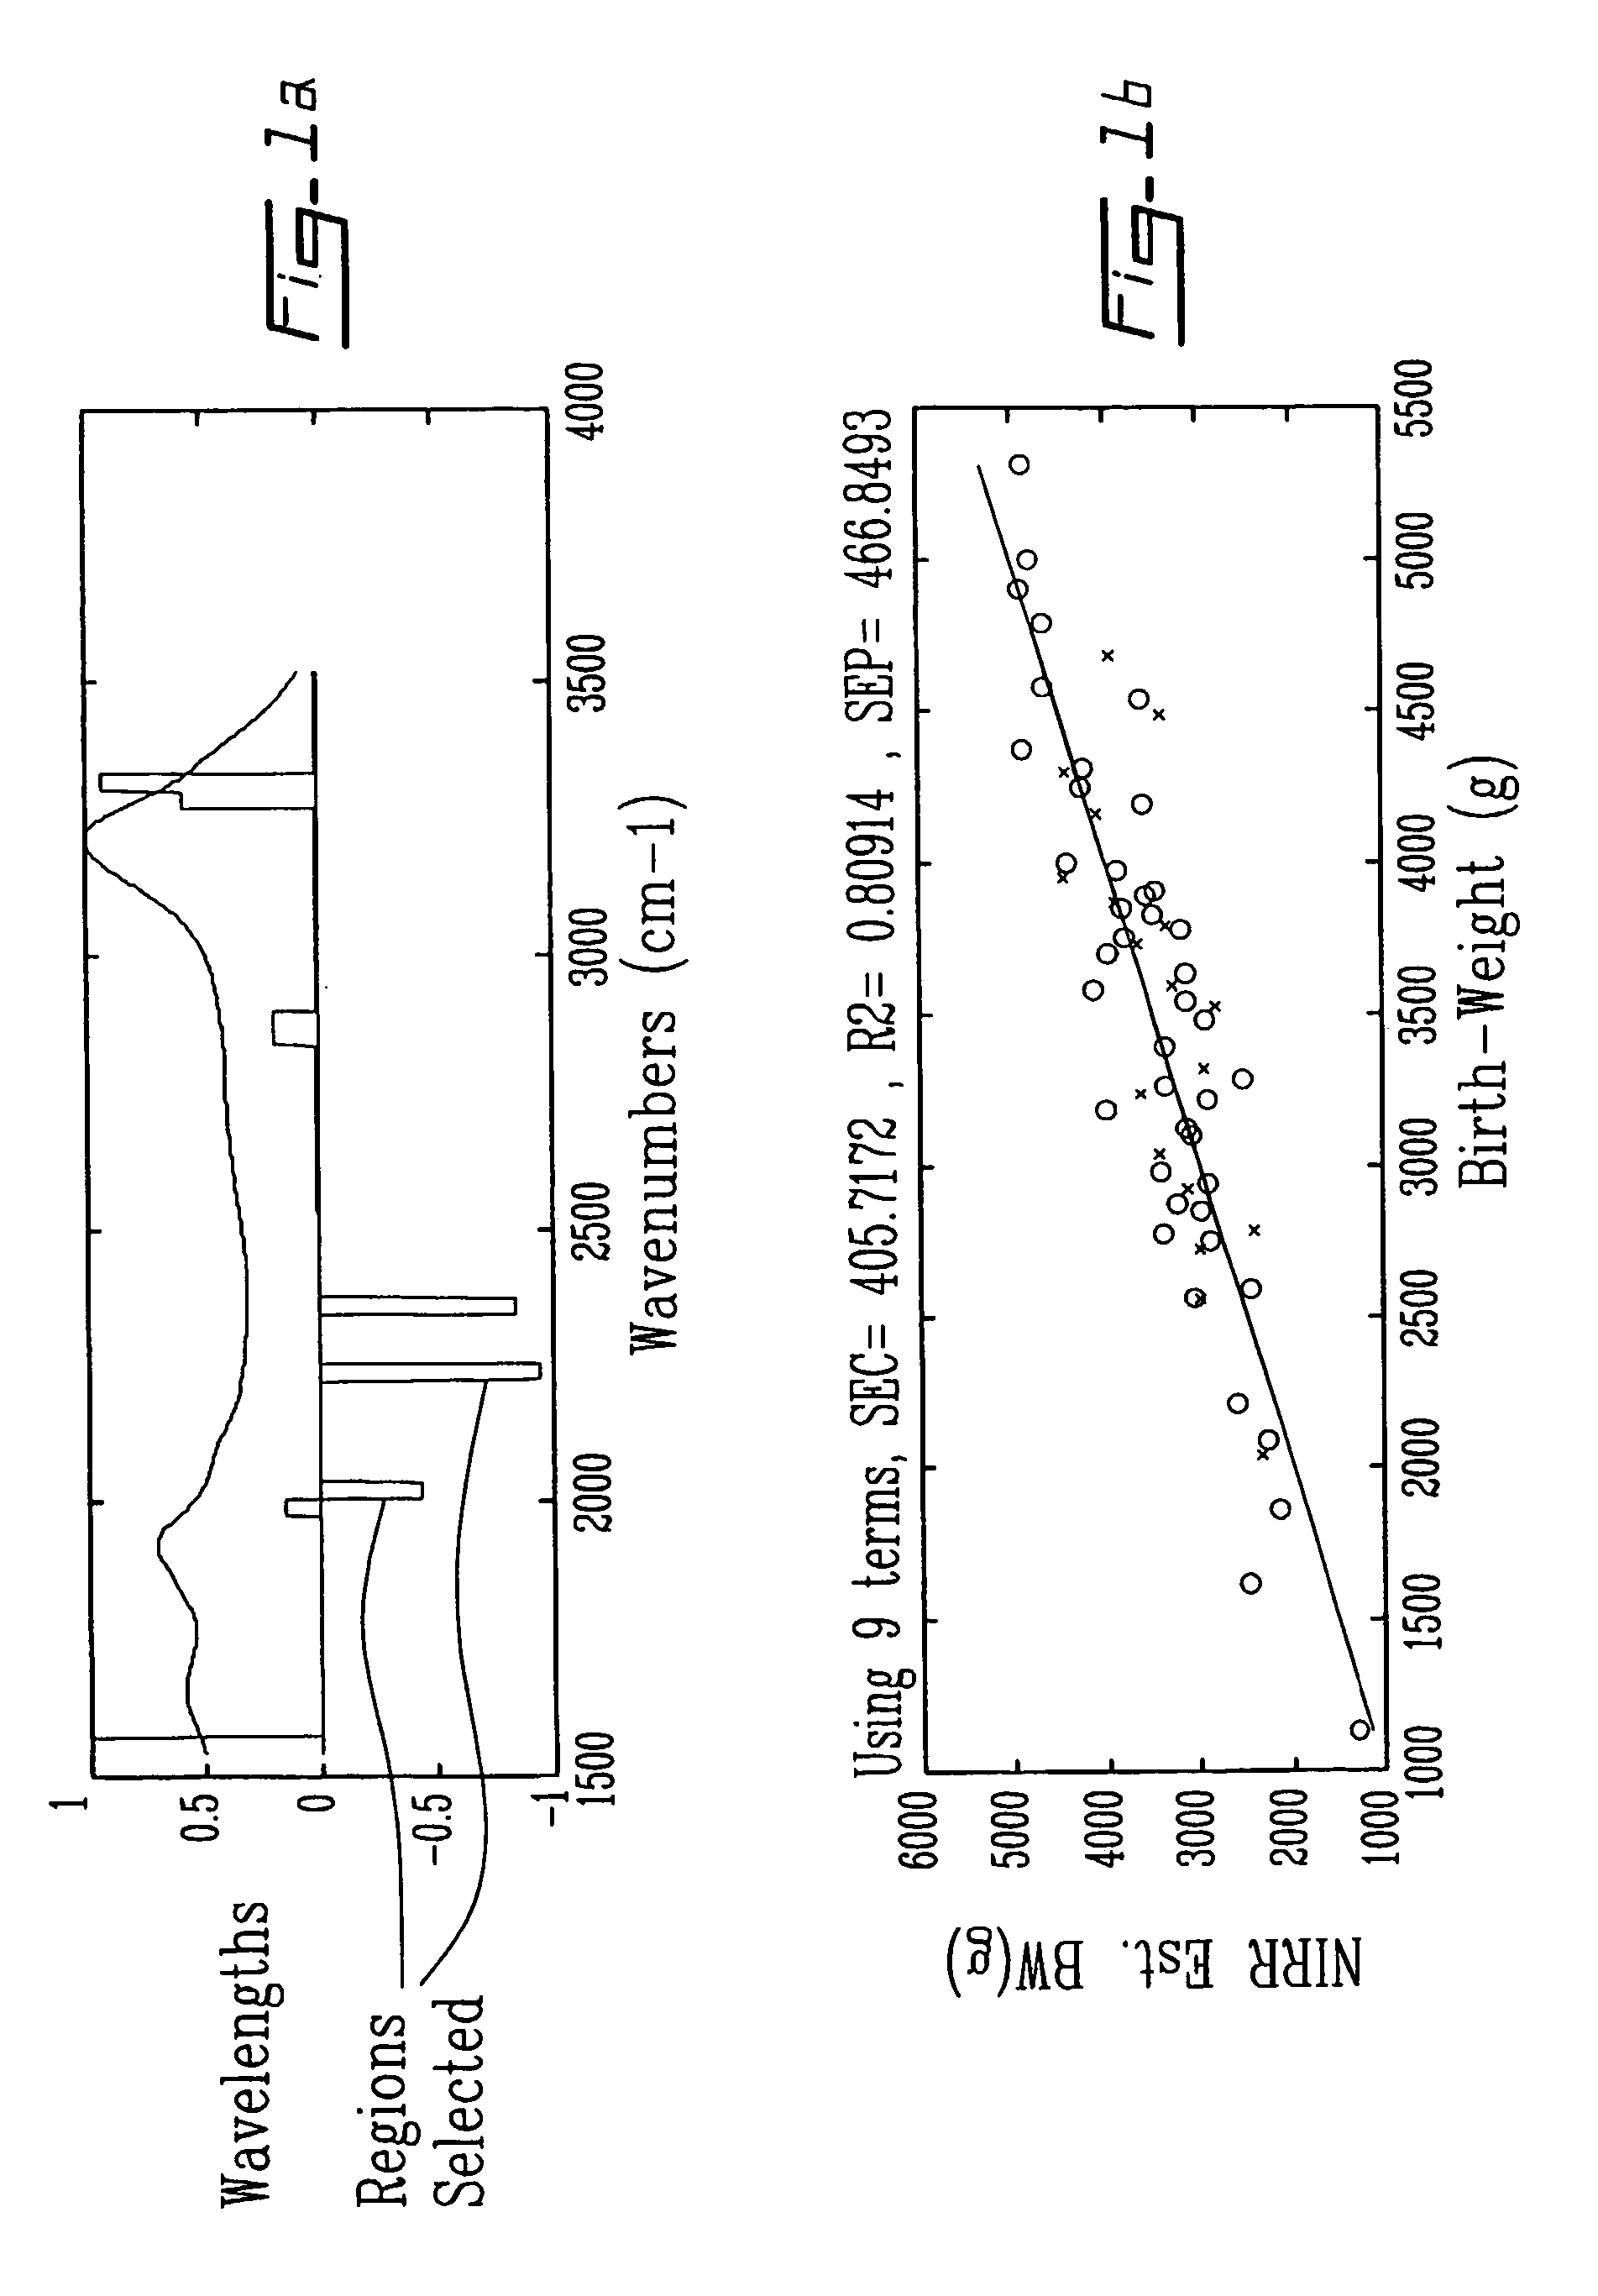 Method and apparatus for analyzing amniotic fluid